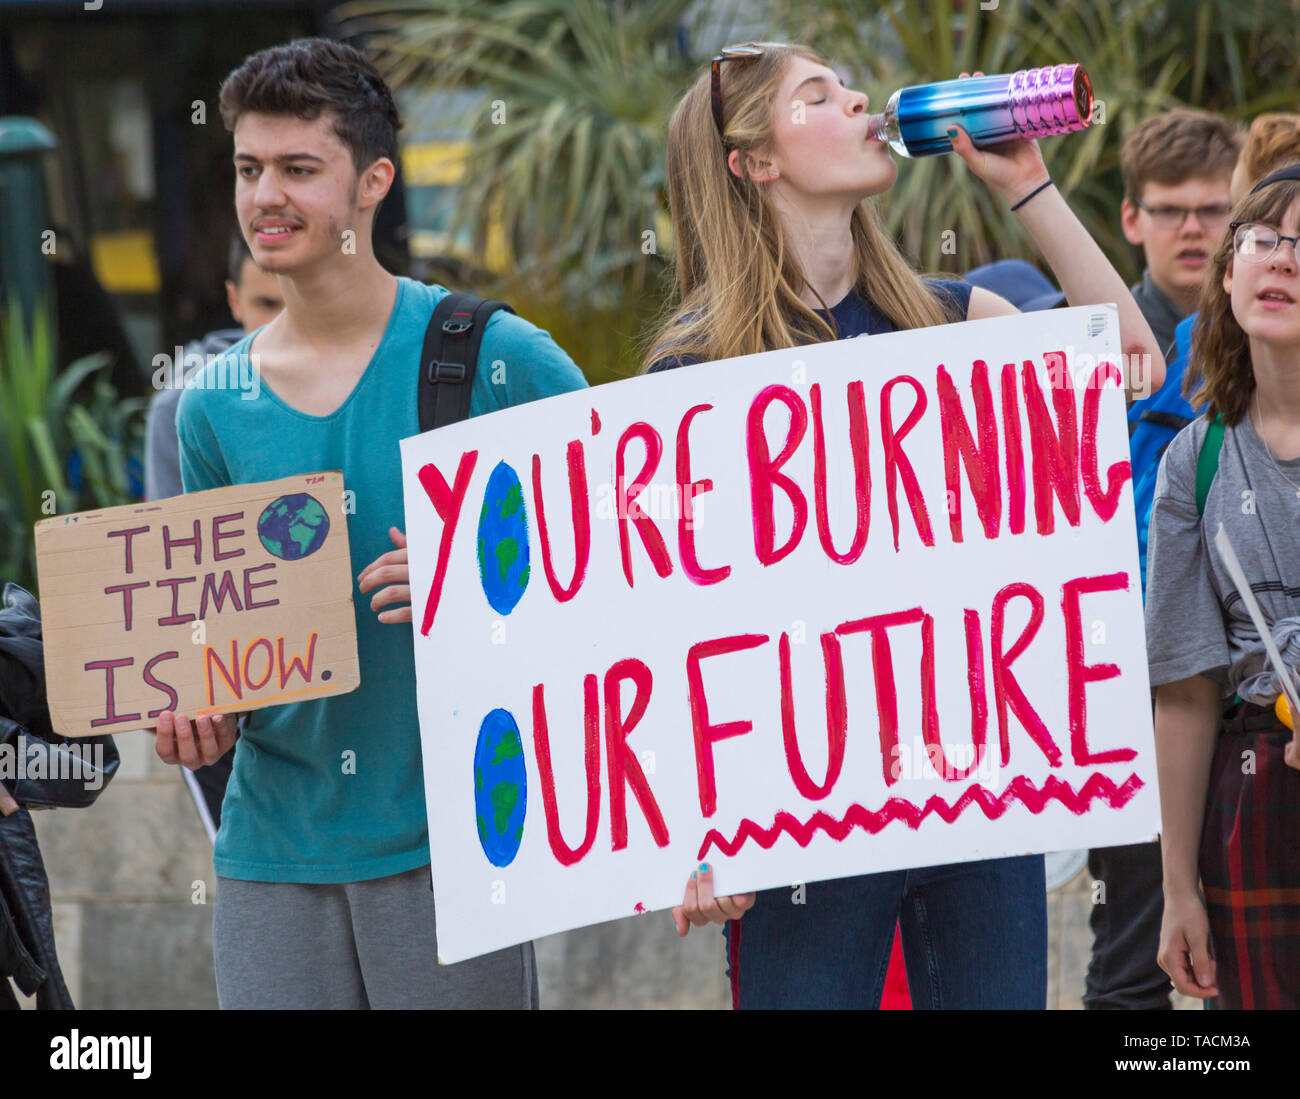 Bournemouth, Dorset, UK. 24th May 2019. Youth Strike 4 Climate gather in Bournemouth Square with their messages about climate change, before marching to the Town Hall.  You're burning our future, the time is now signs. Credit: Carolyn Jenkins/Alamy Live News Stock Photo